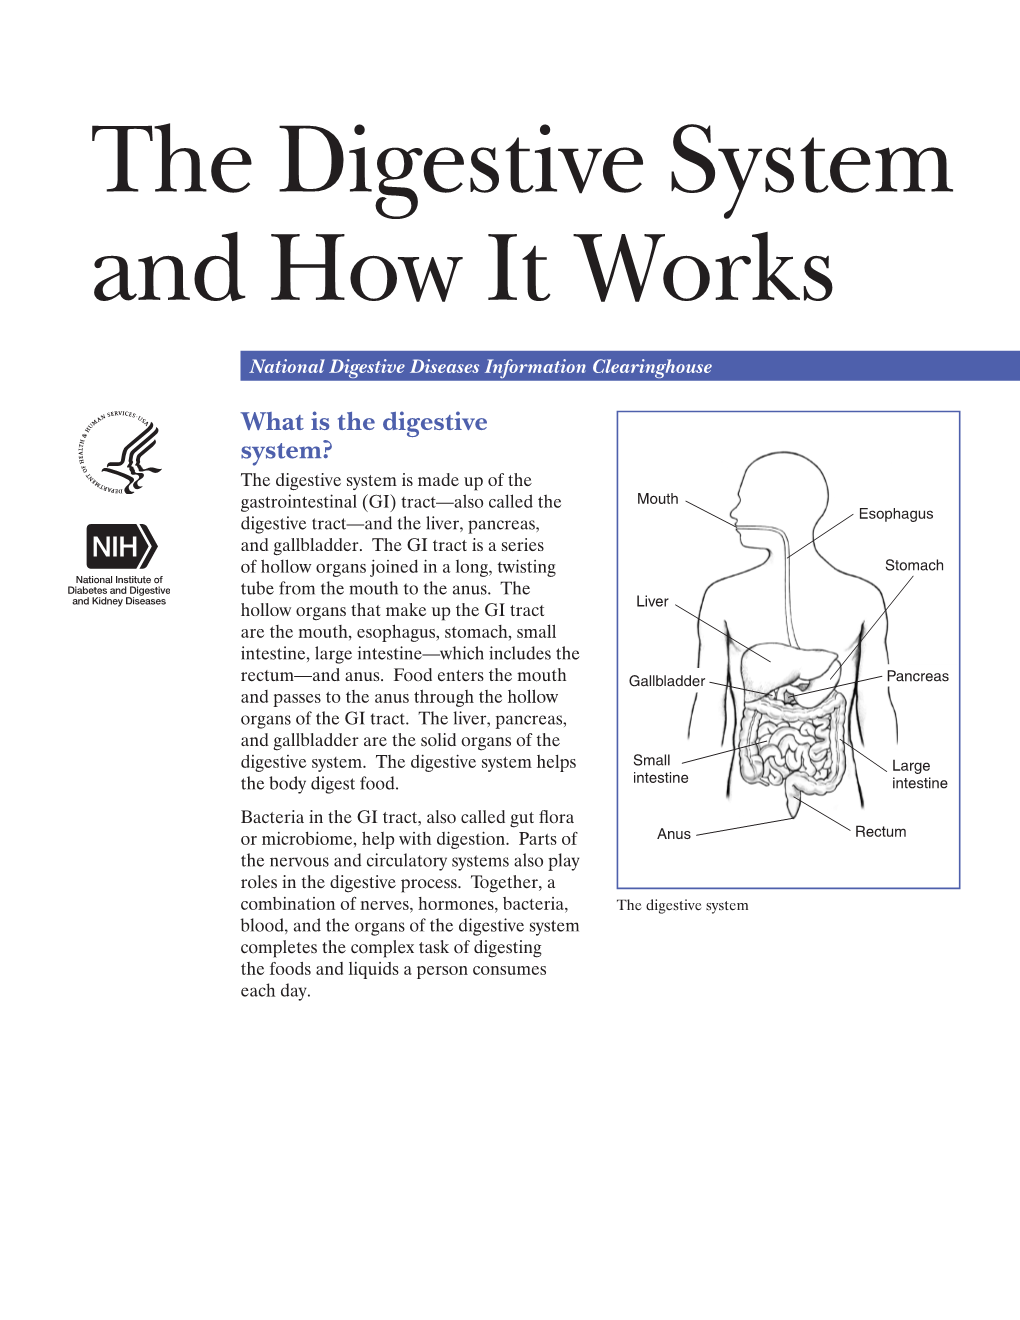 The Digestive System and How It Works